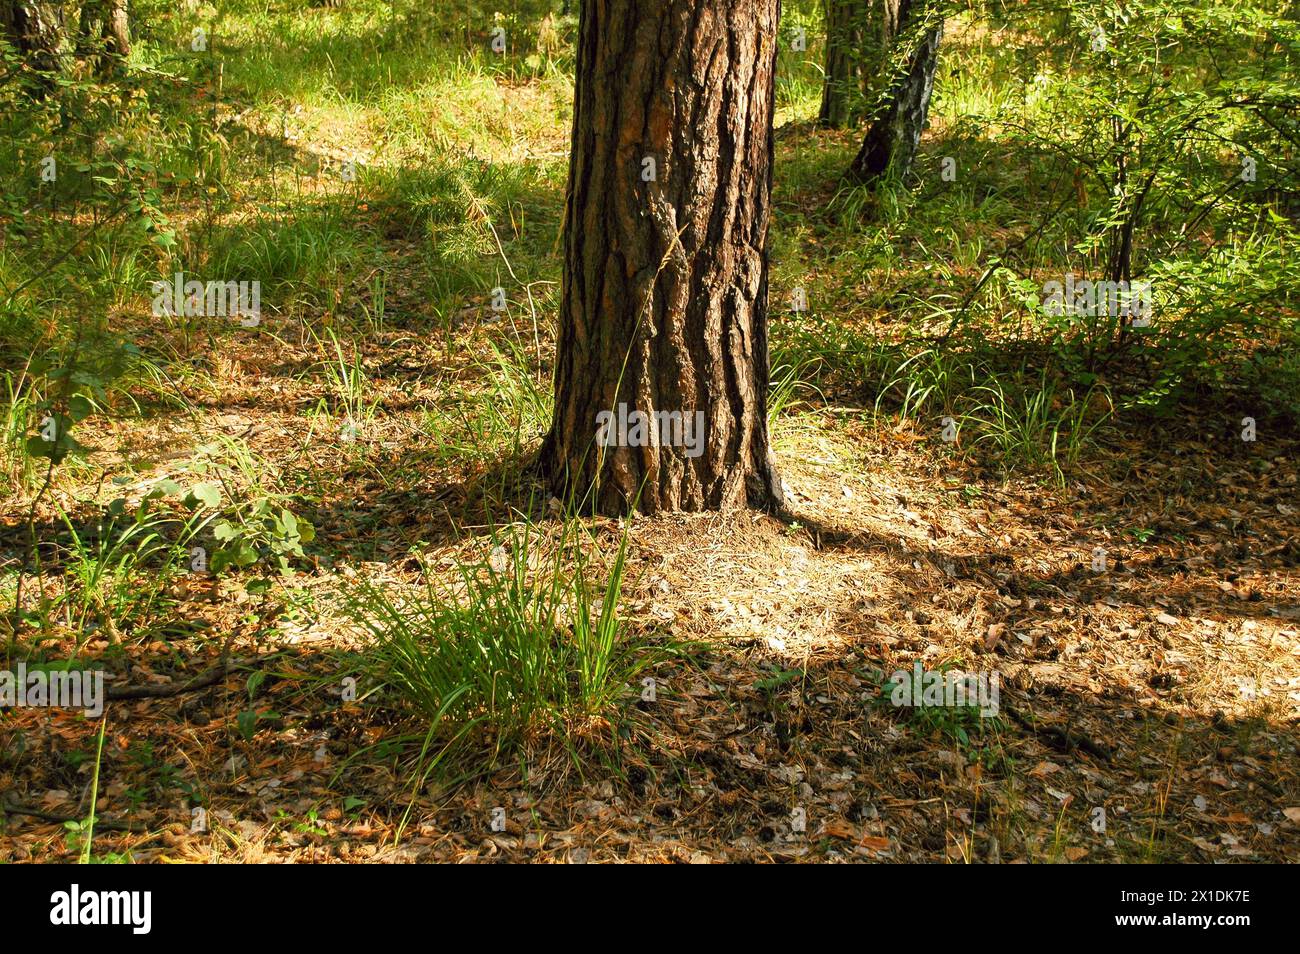 Pine tree trunk in the middle of green grass and land with cones illuminated by sunlight Stock Photo